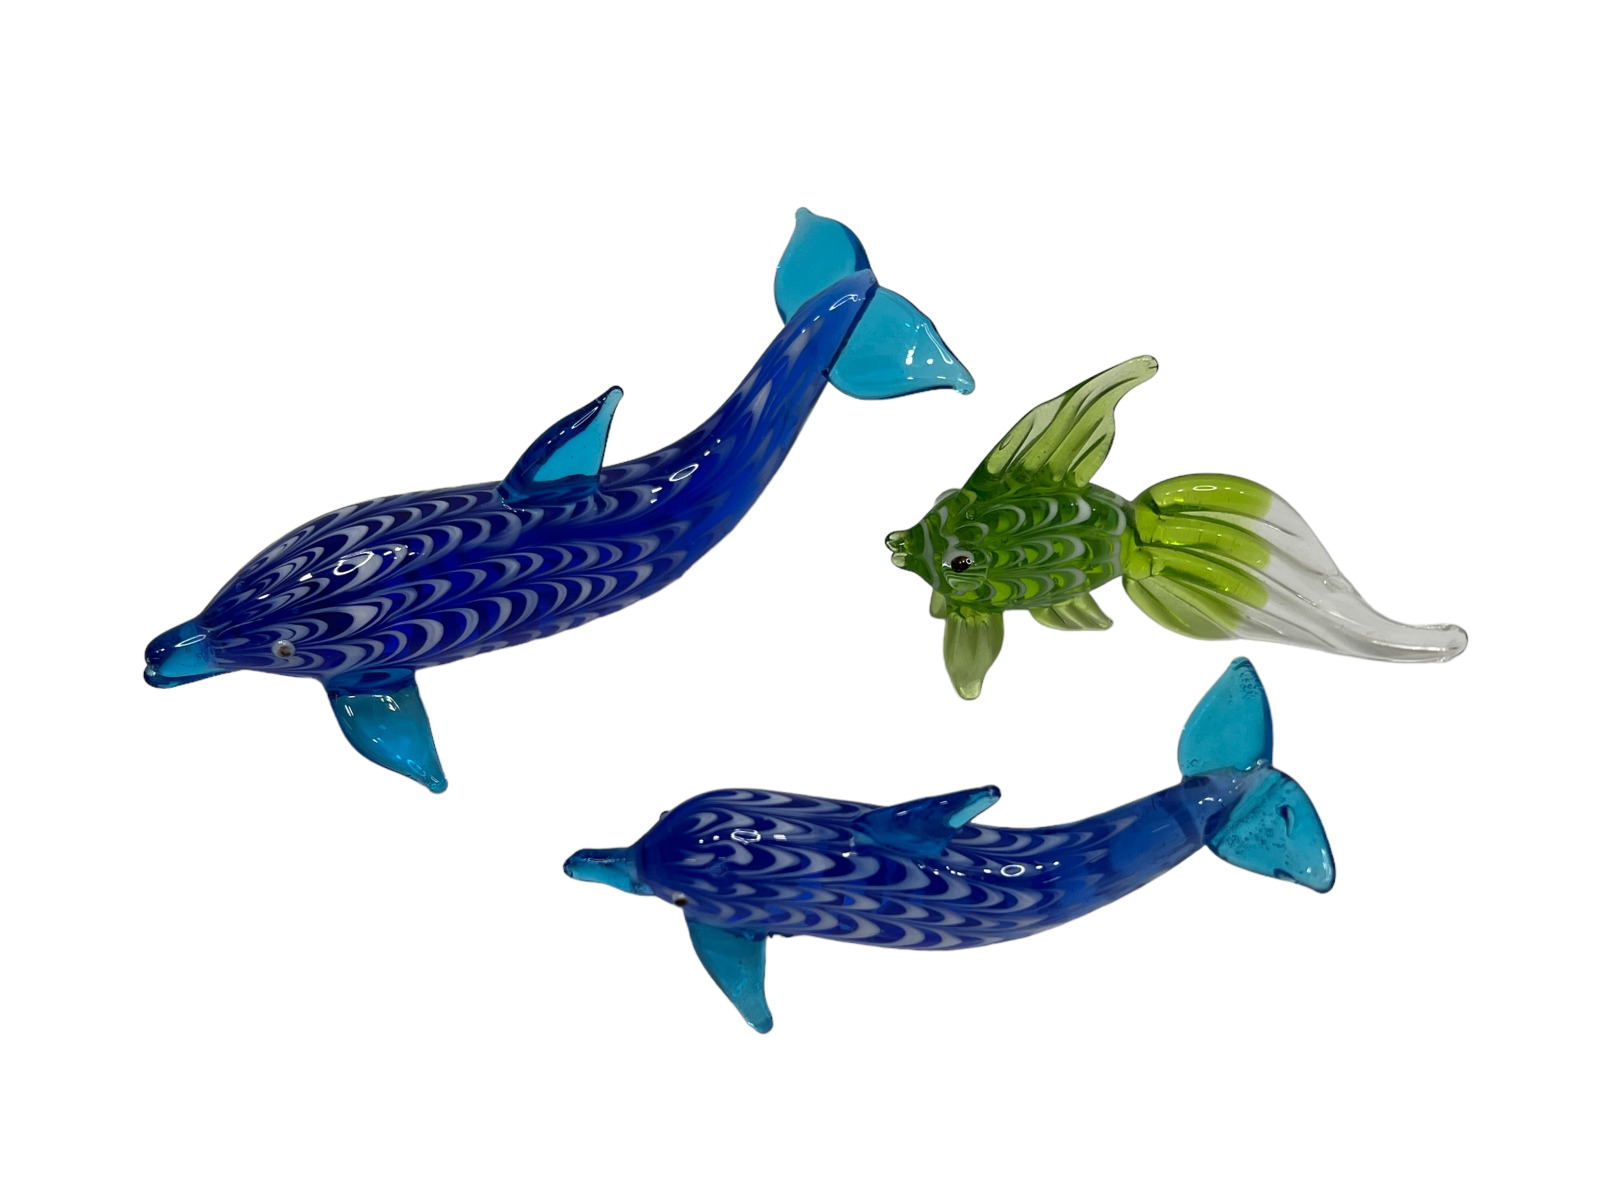 Lenox Deep Blue Dolphins, Green Fish Art Glass Figurines Decorative Collectible